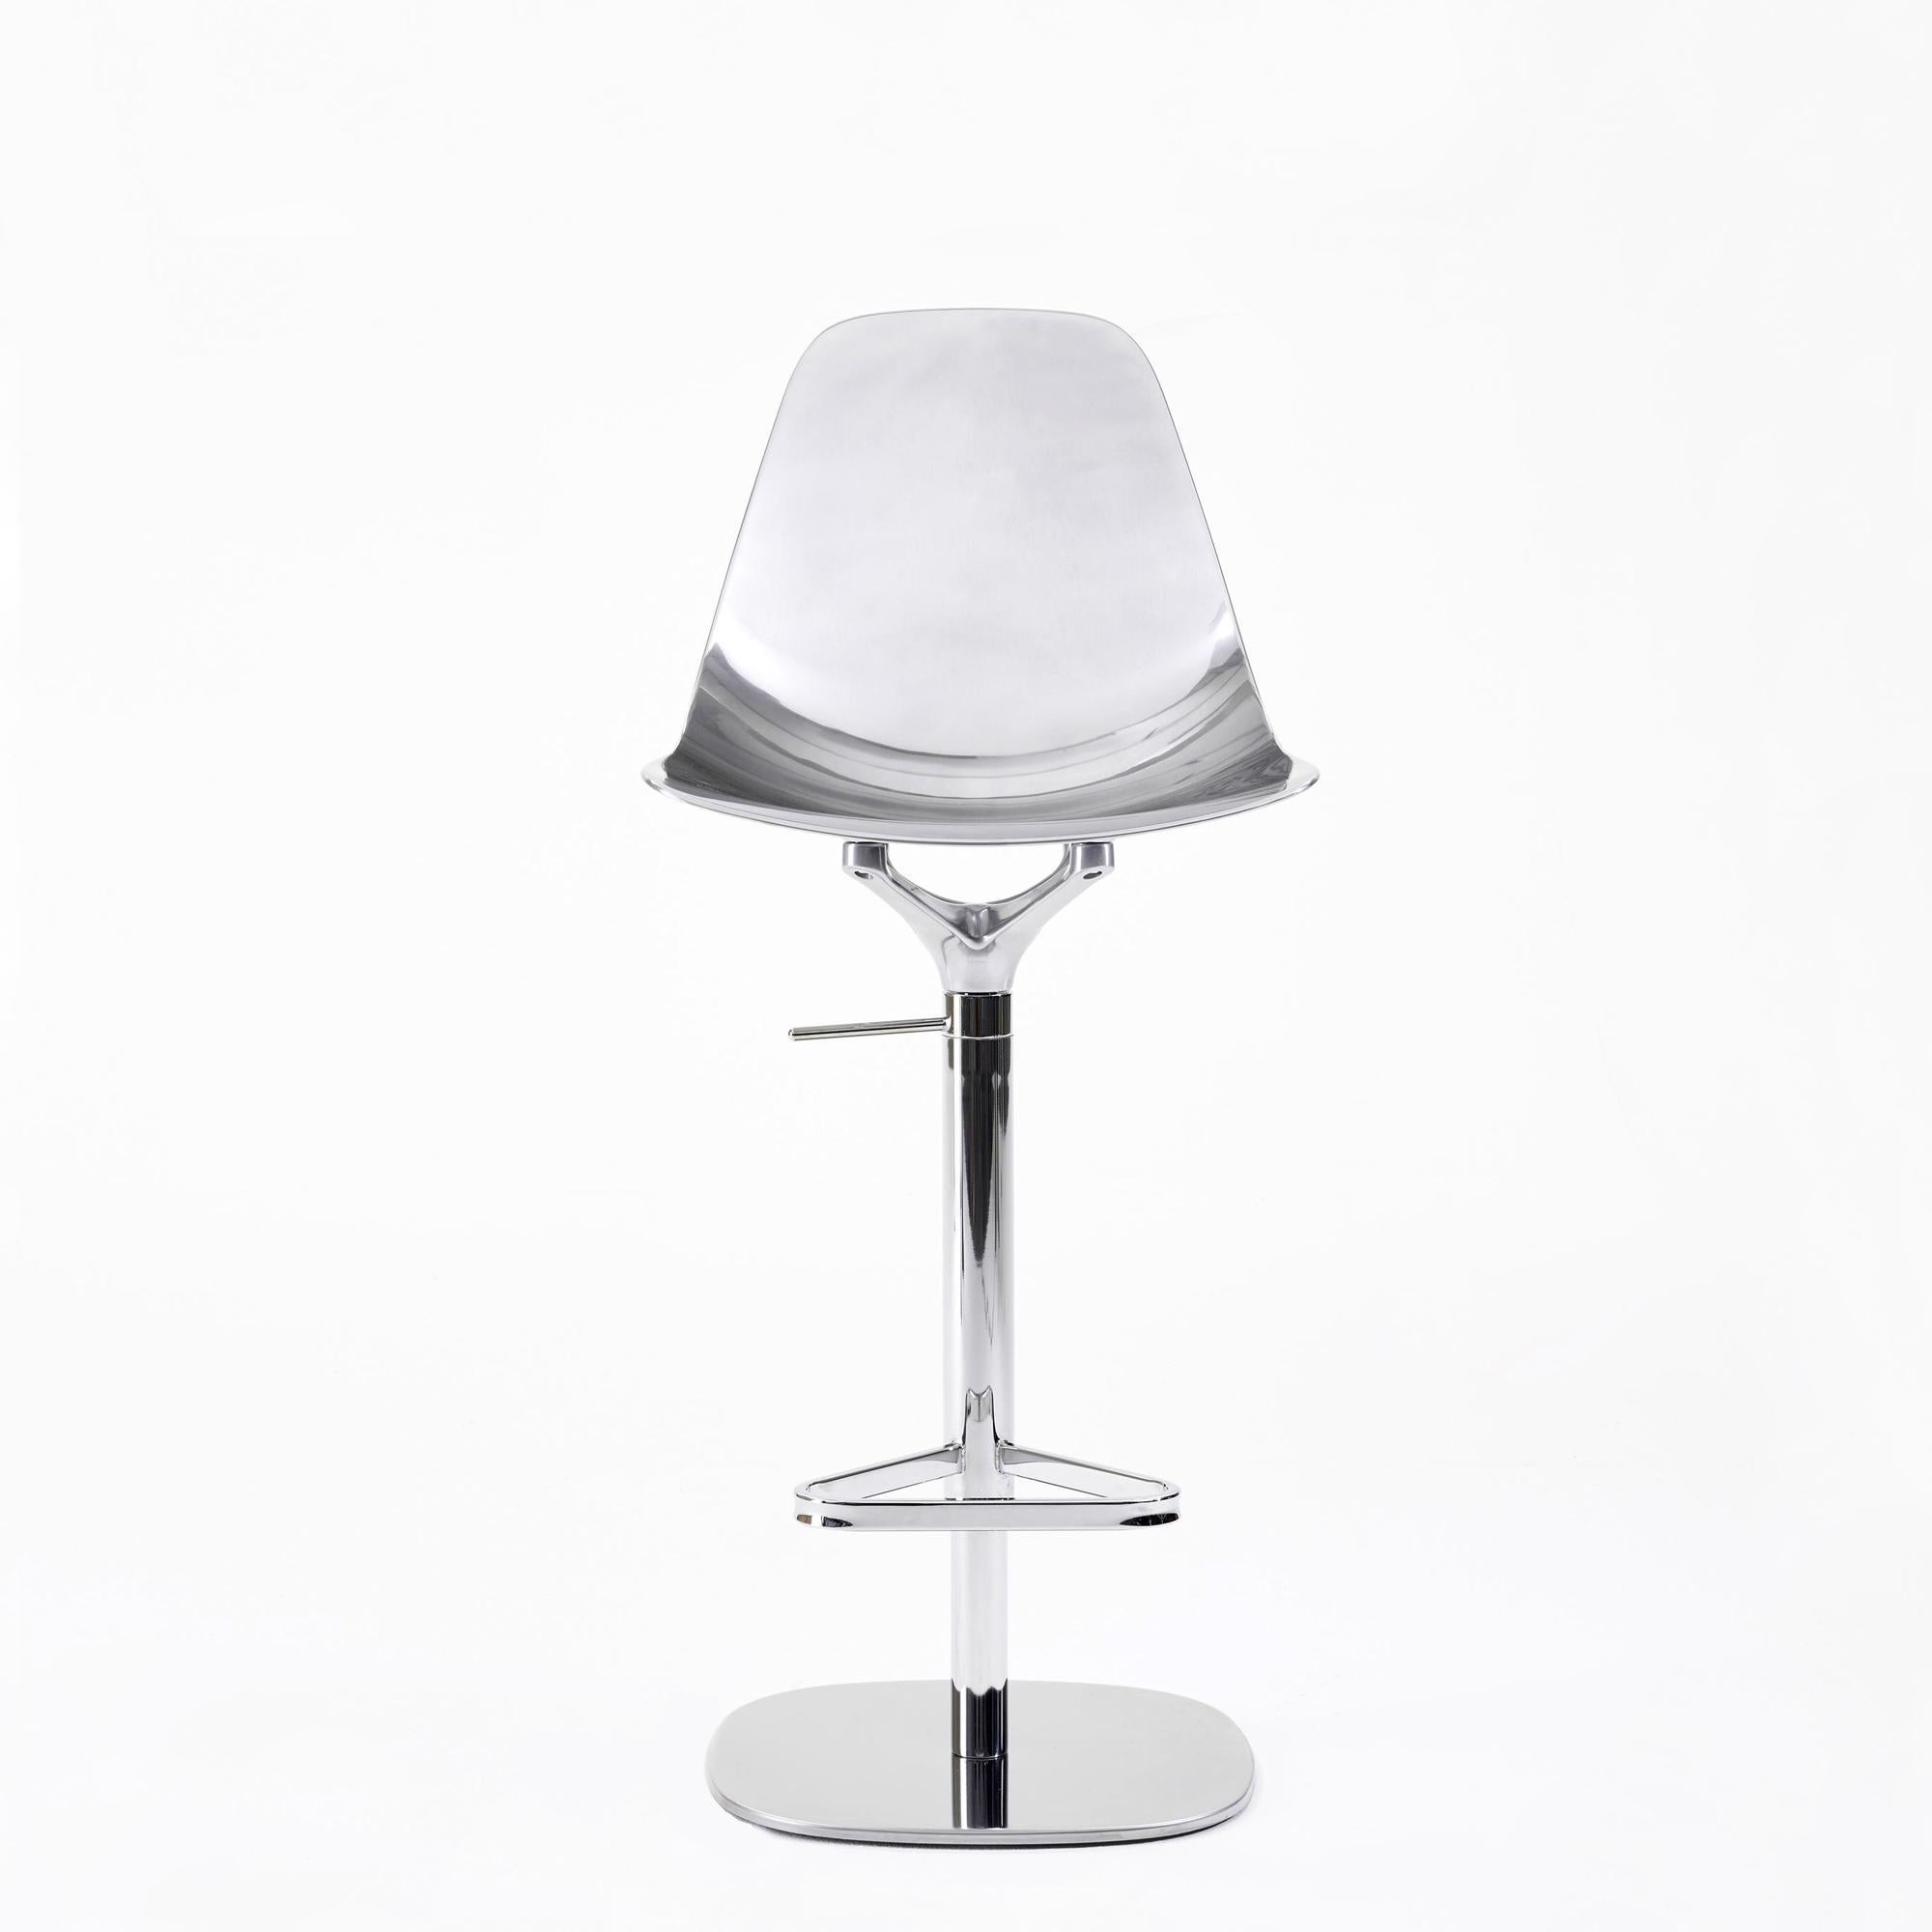 Bar stool needle swivel in polished aluminium
in chrome finish. On swivel base with footrest.
With adjustable height from 58 to 112 cm.
Also available in polished iron in chrome finish.